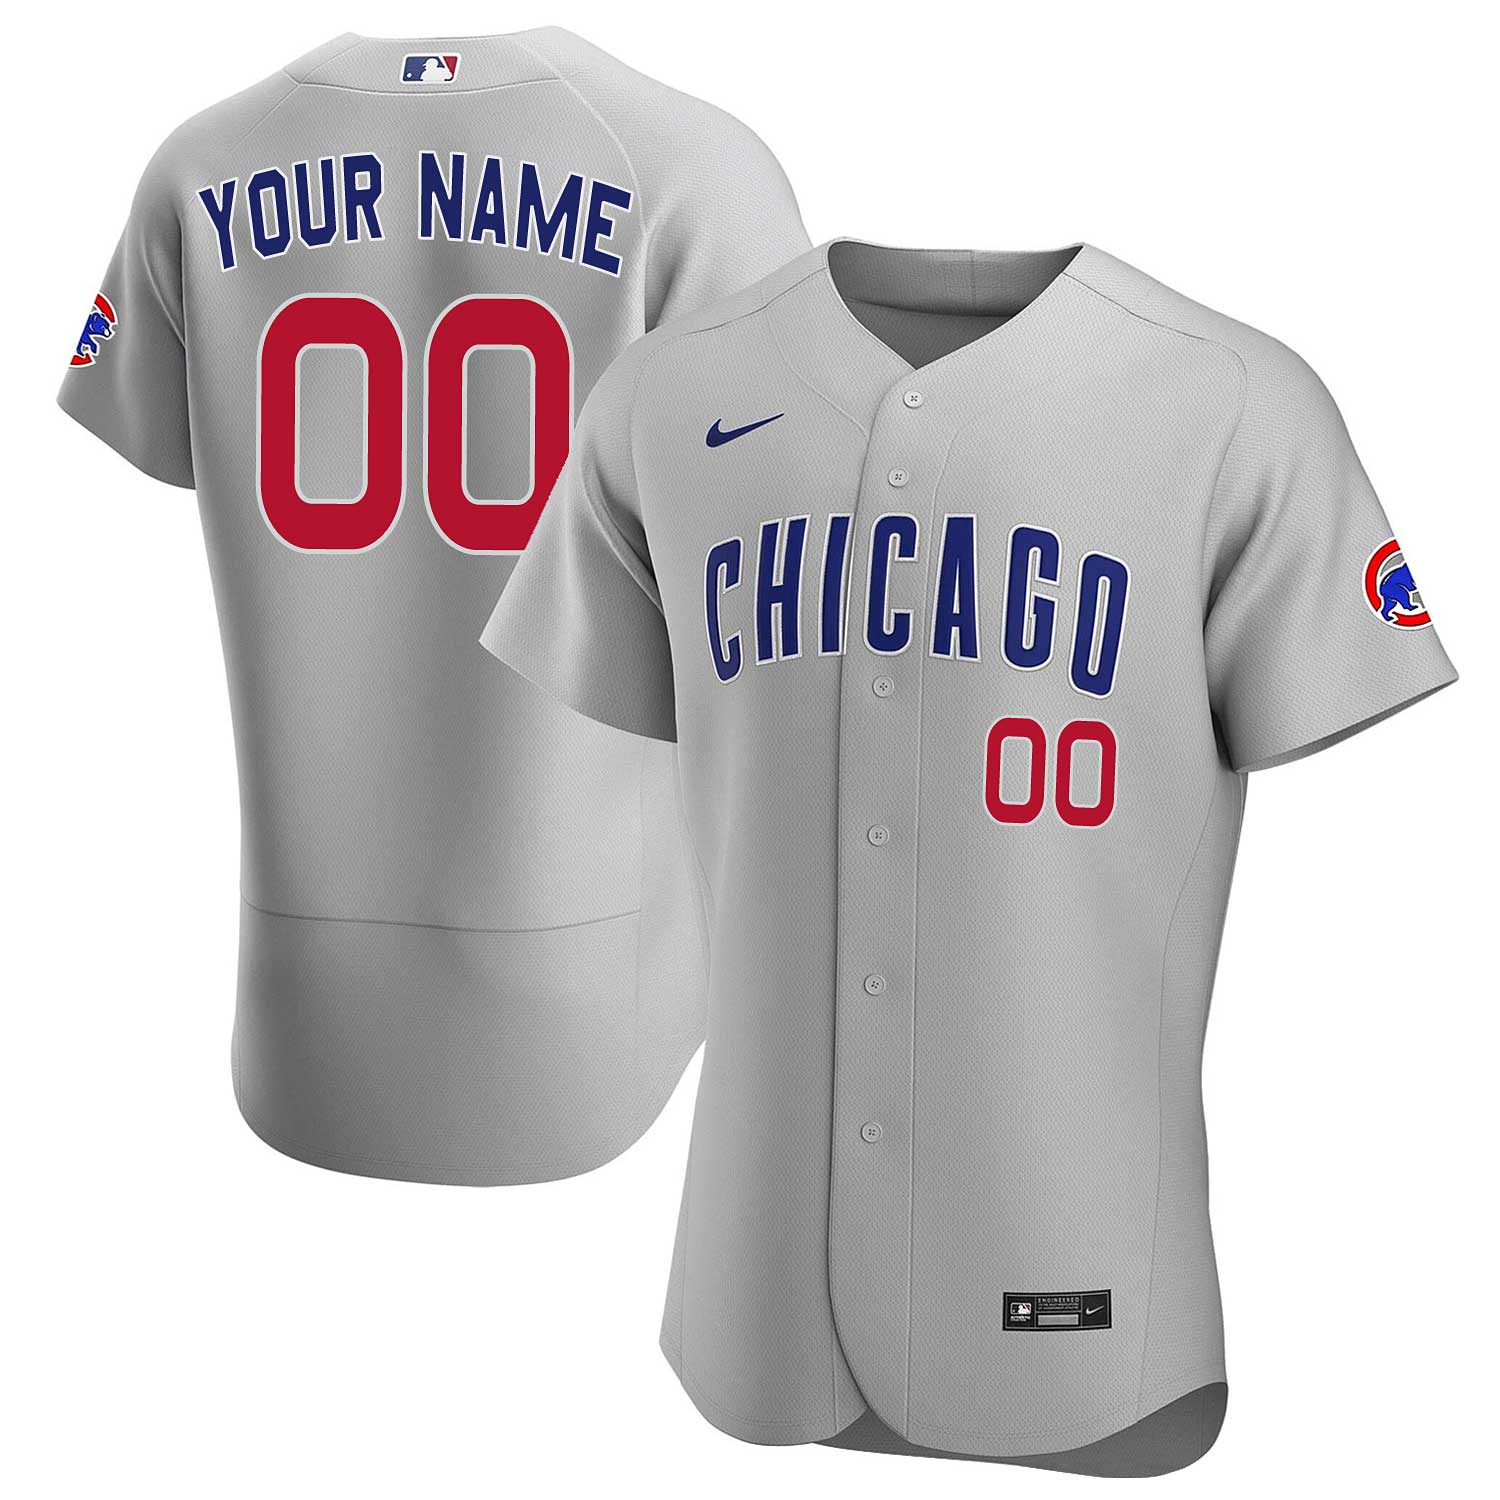 Men's Chicago Cubs Nike White Home Authentic Custom Jersey